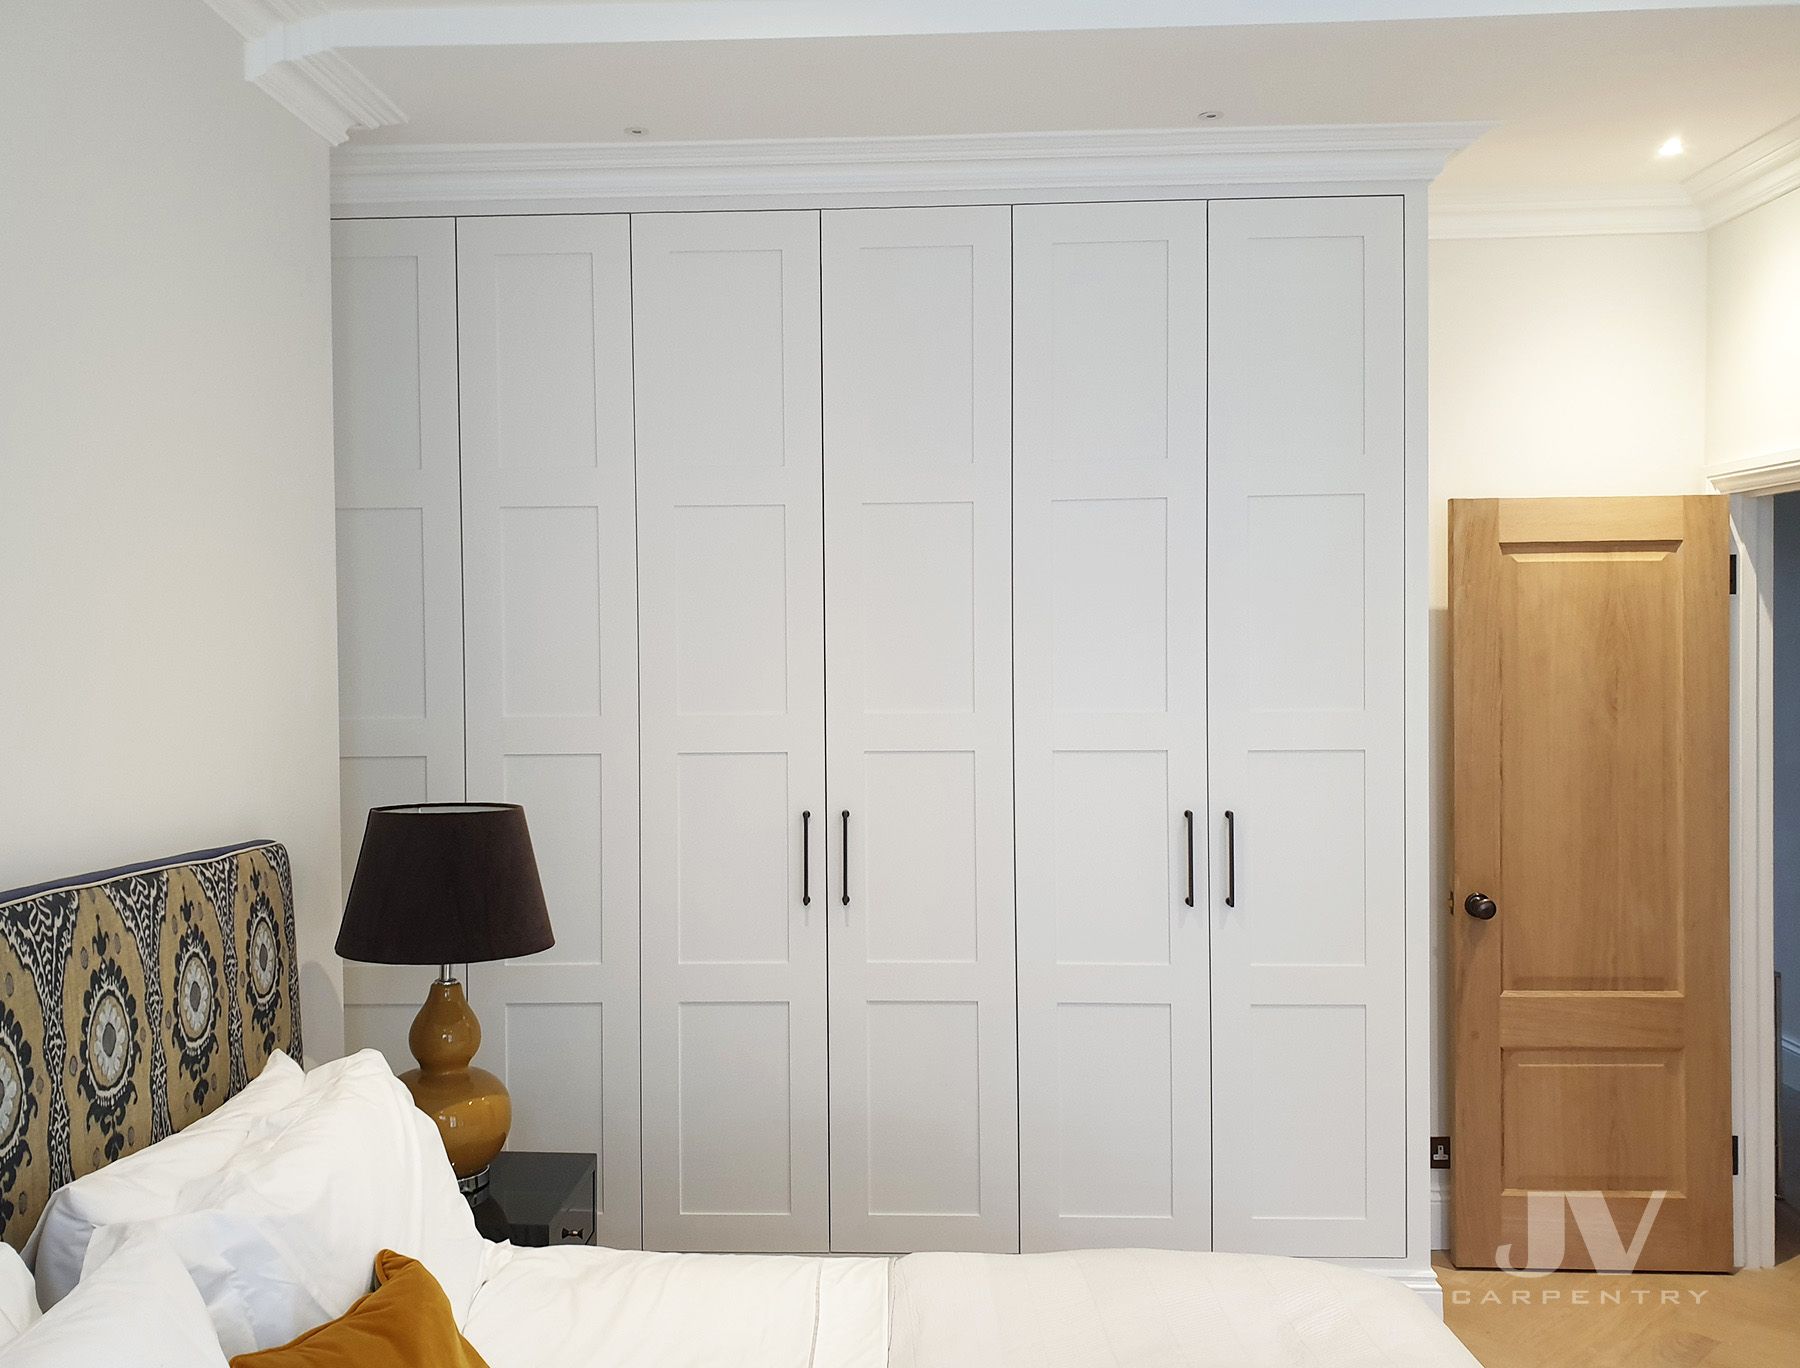 Fitted Wardrobes | Bespoke Bedroom Furniture | Jv Carpentry With Regard To Built In Wardrobes (Photo 11 of 15)